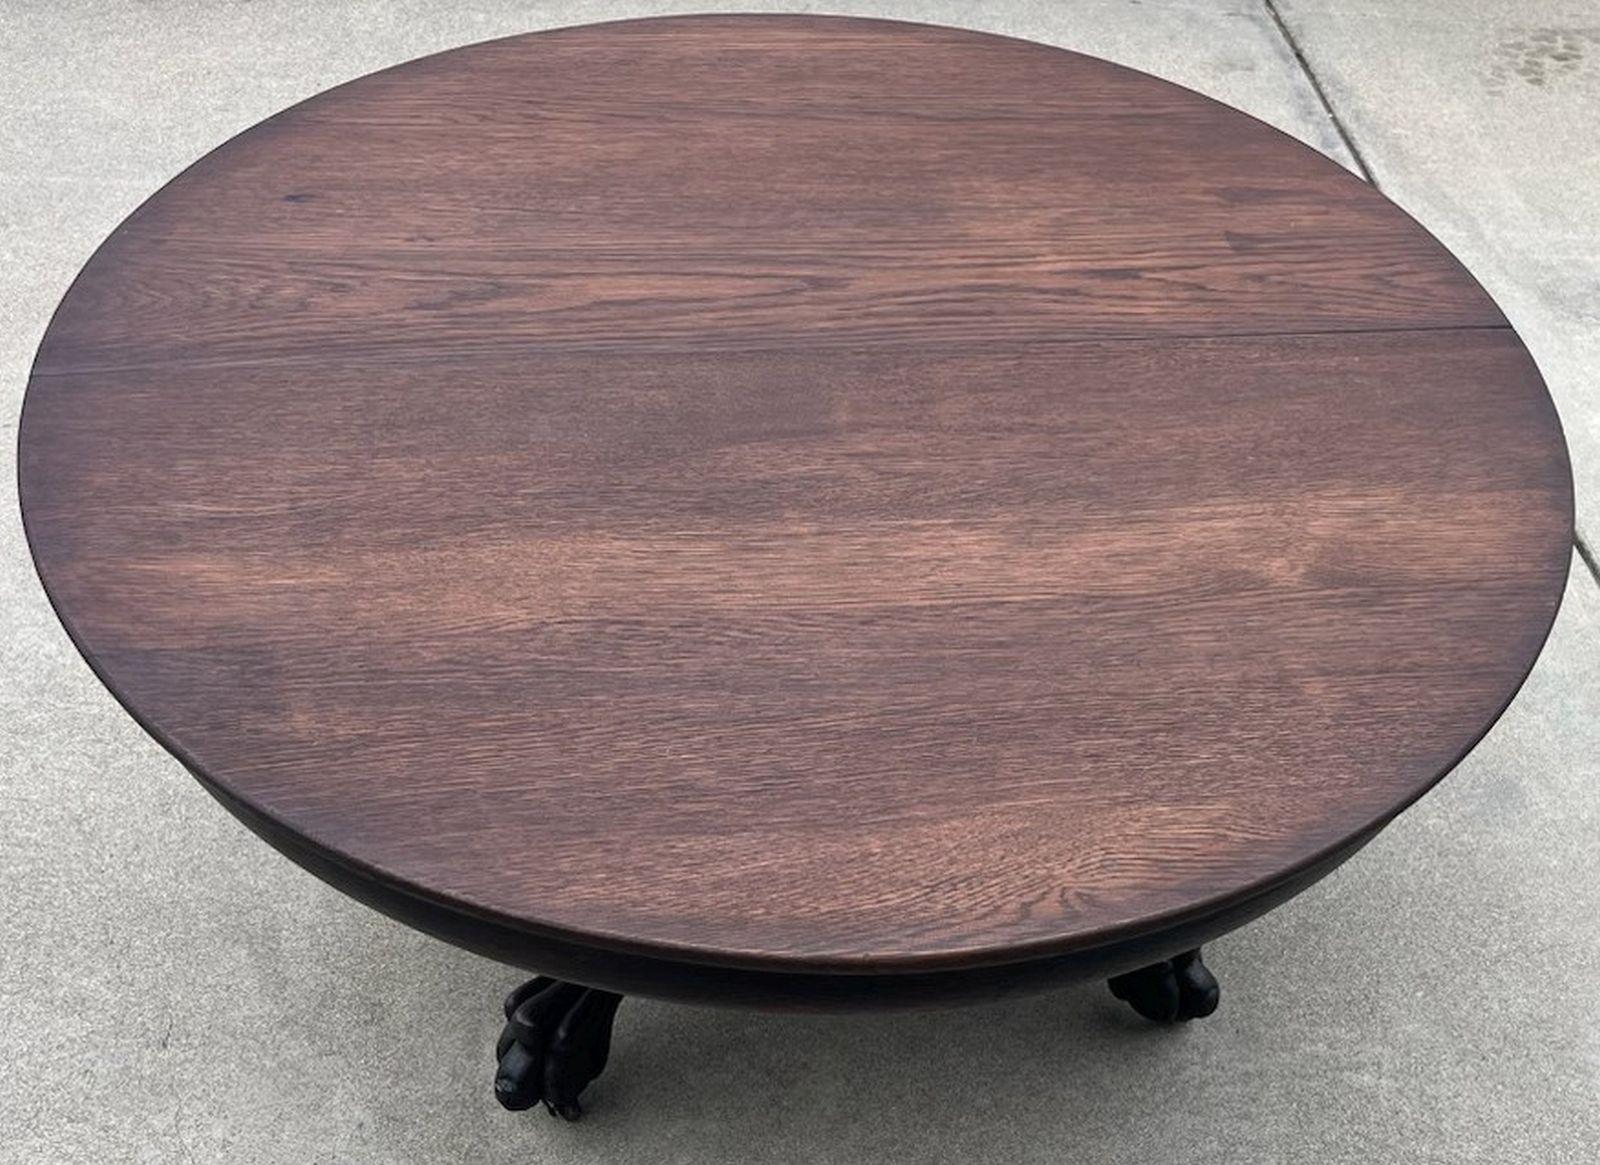 This cool round pedestal coffee table has the original cast iron casters below the hand-carved claw feet. Some call them tiger paw feet and is in great condition. The top is a two board top that clearly had additional leaf's at one time. It is so